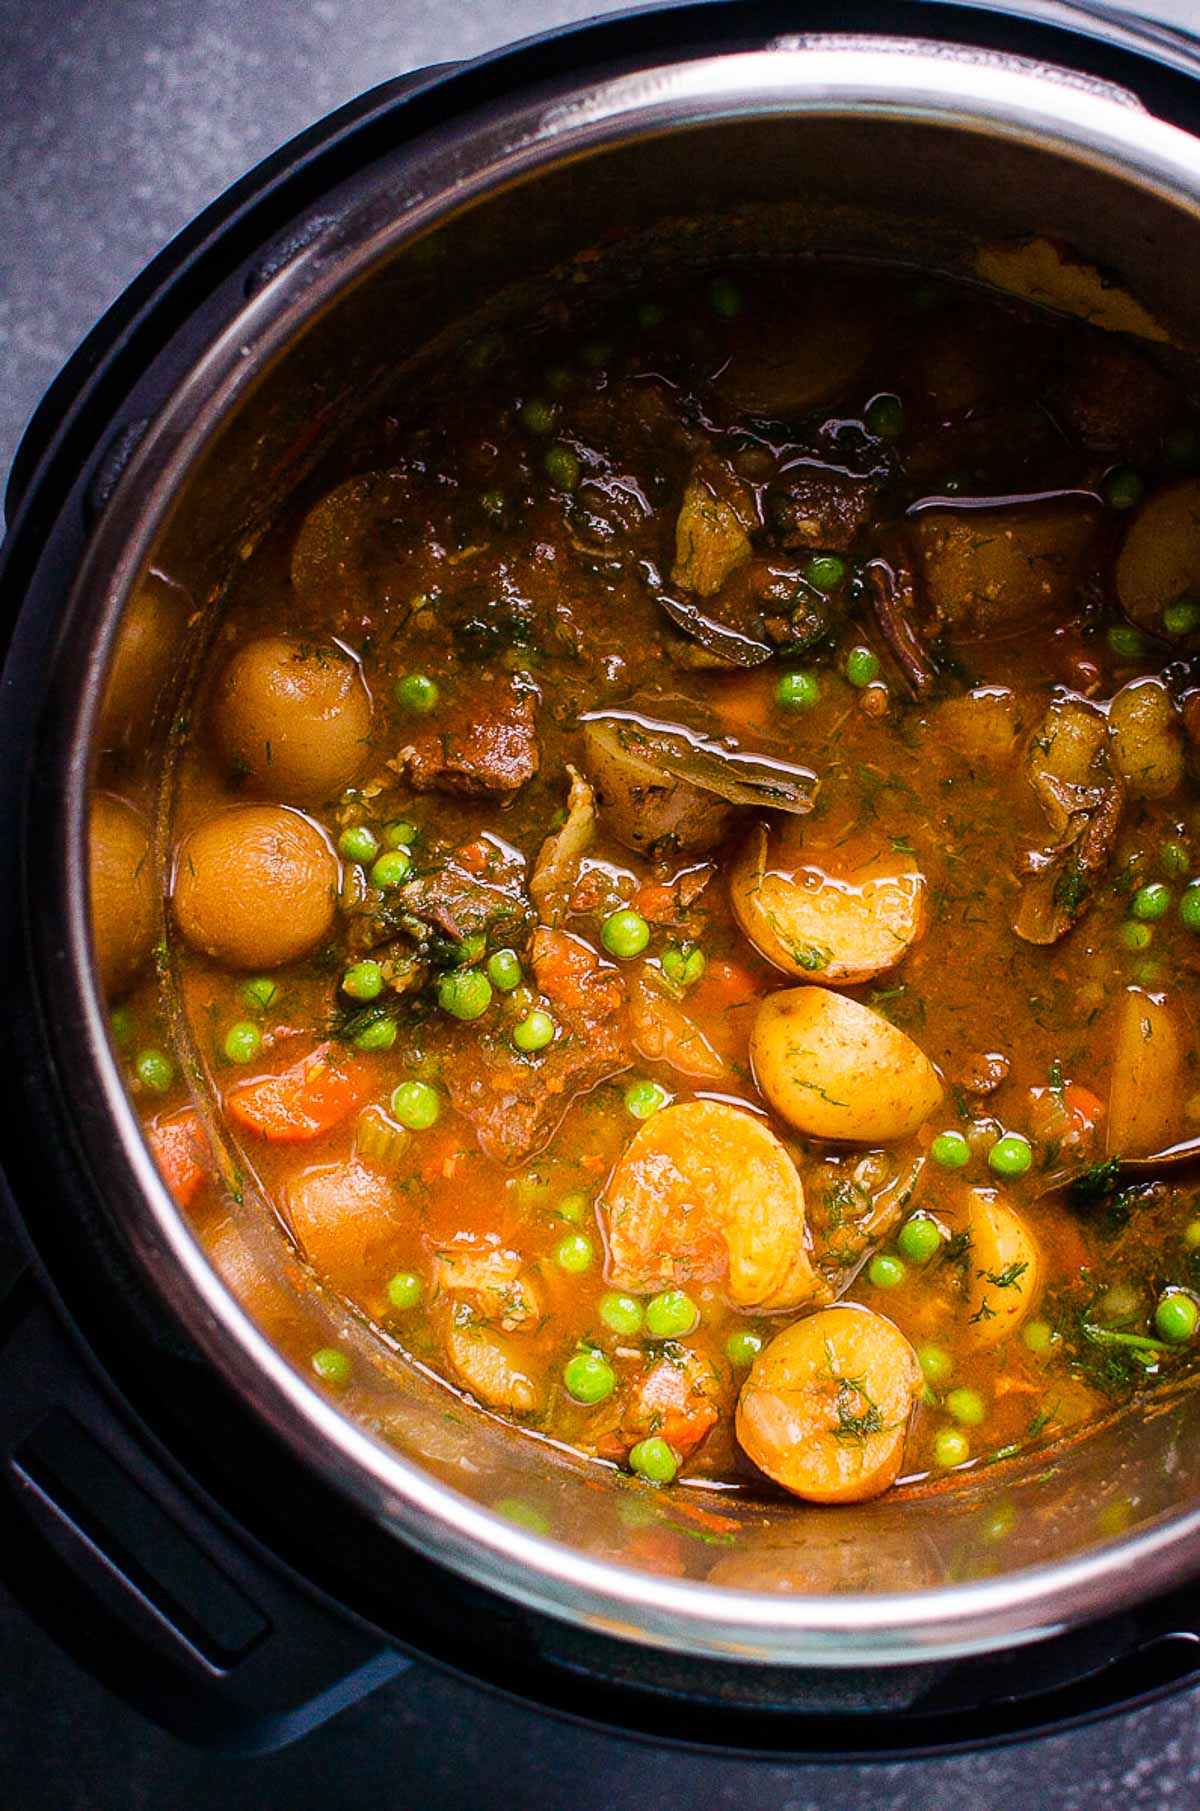 Instant Pot beef stew with peas, dill and carrots in rich broth in the pressure cooker.